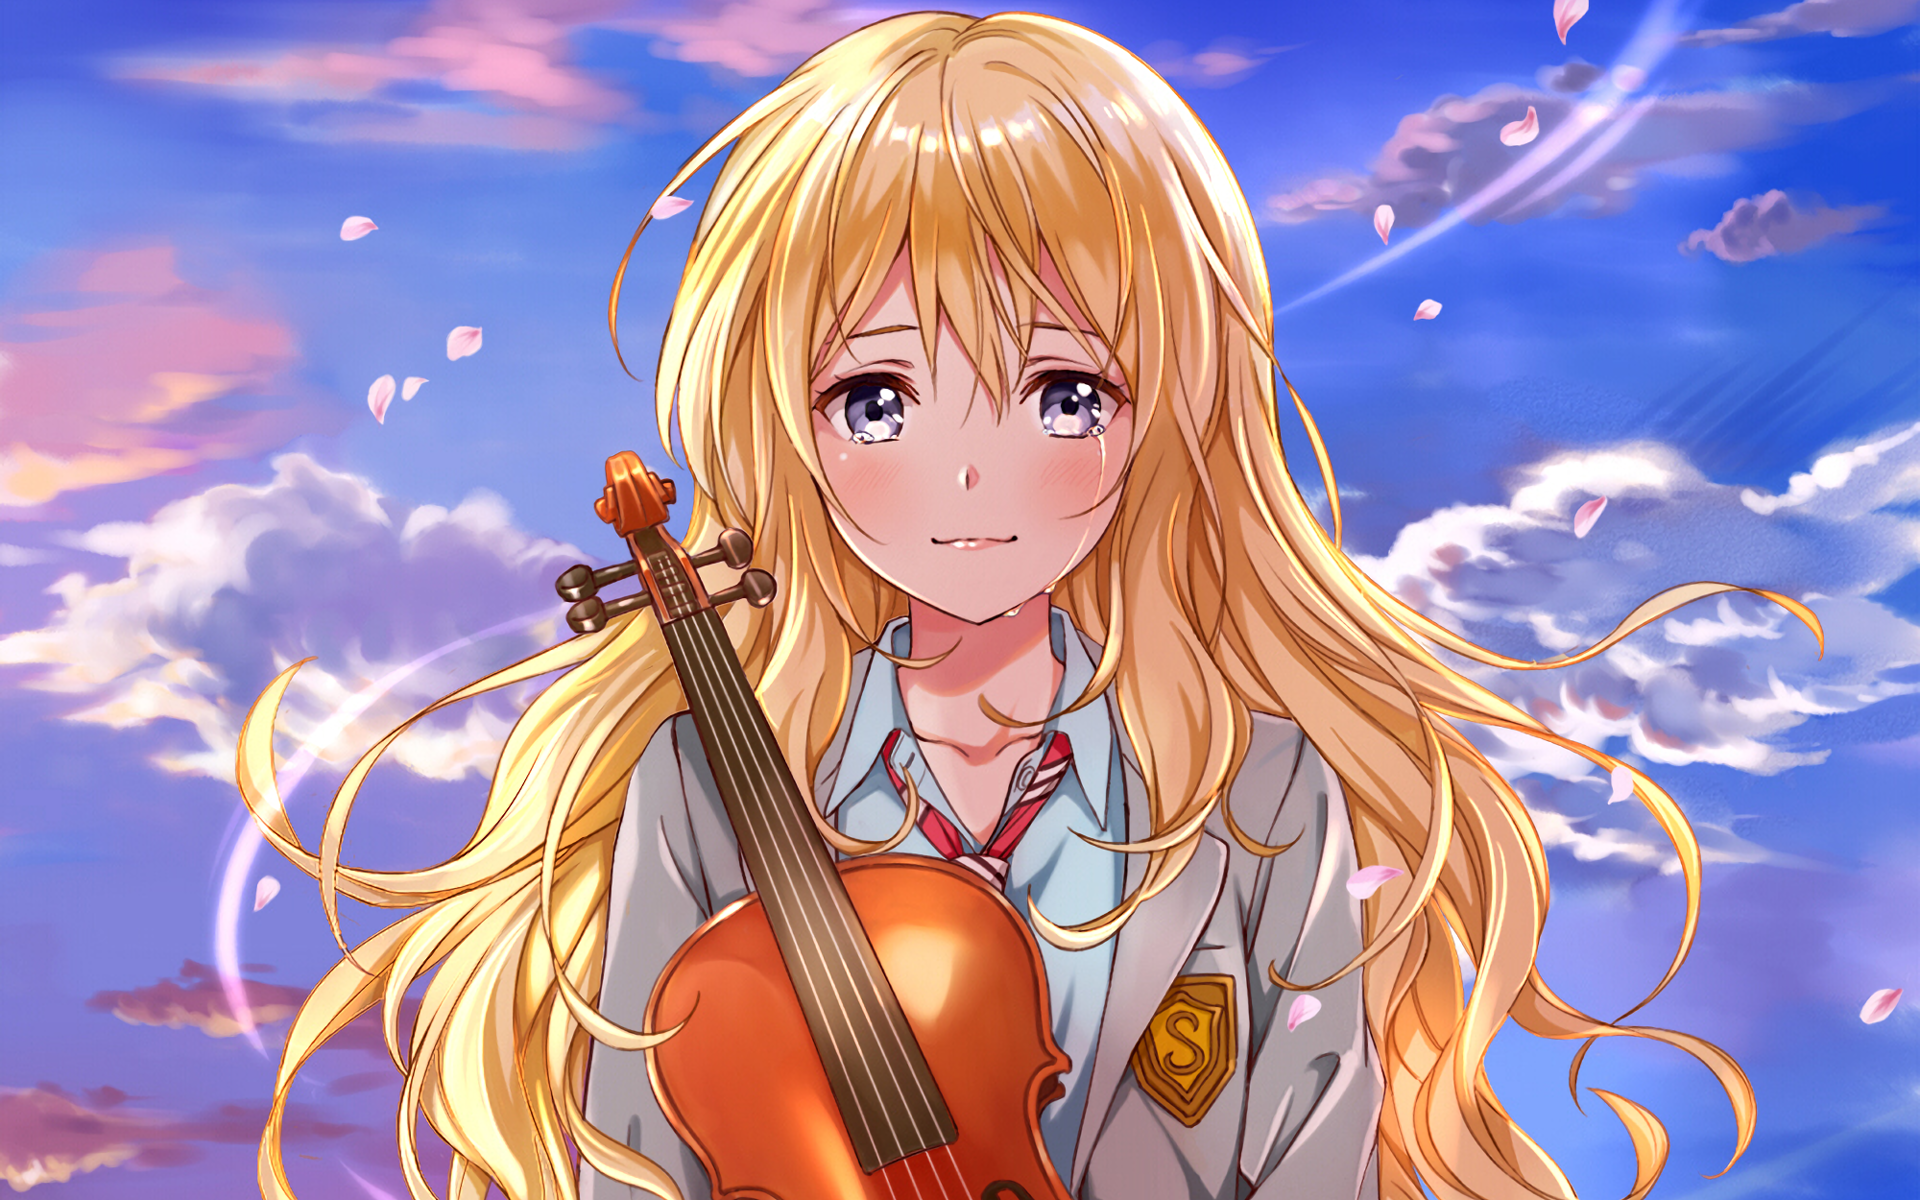 9. Your Lie in April - wide 10